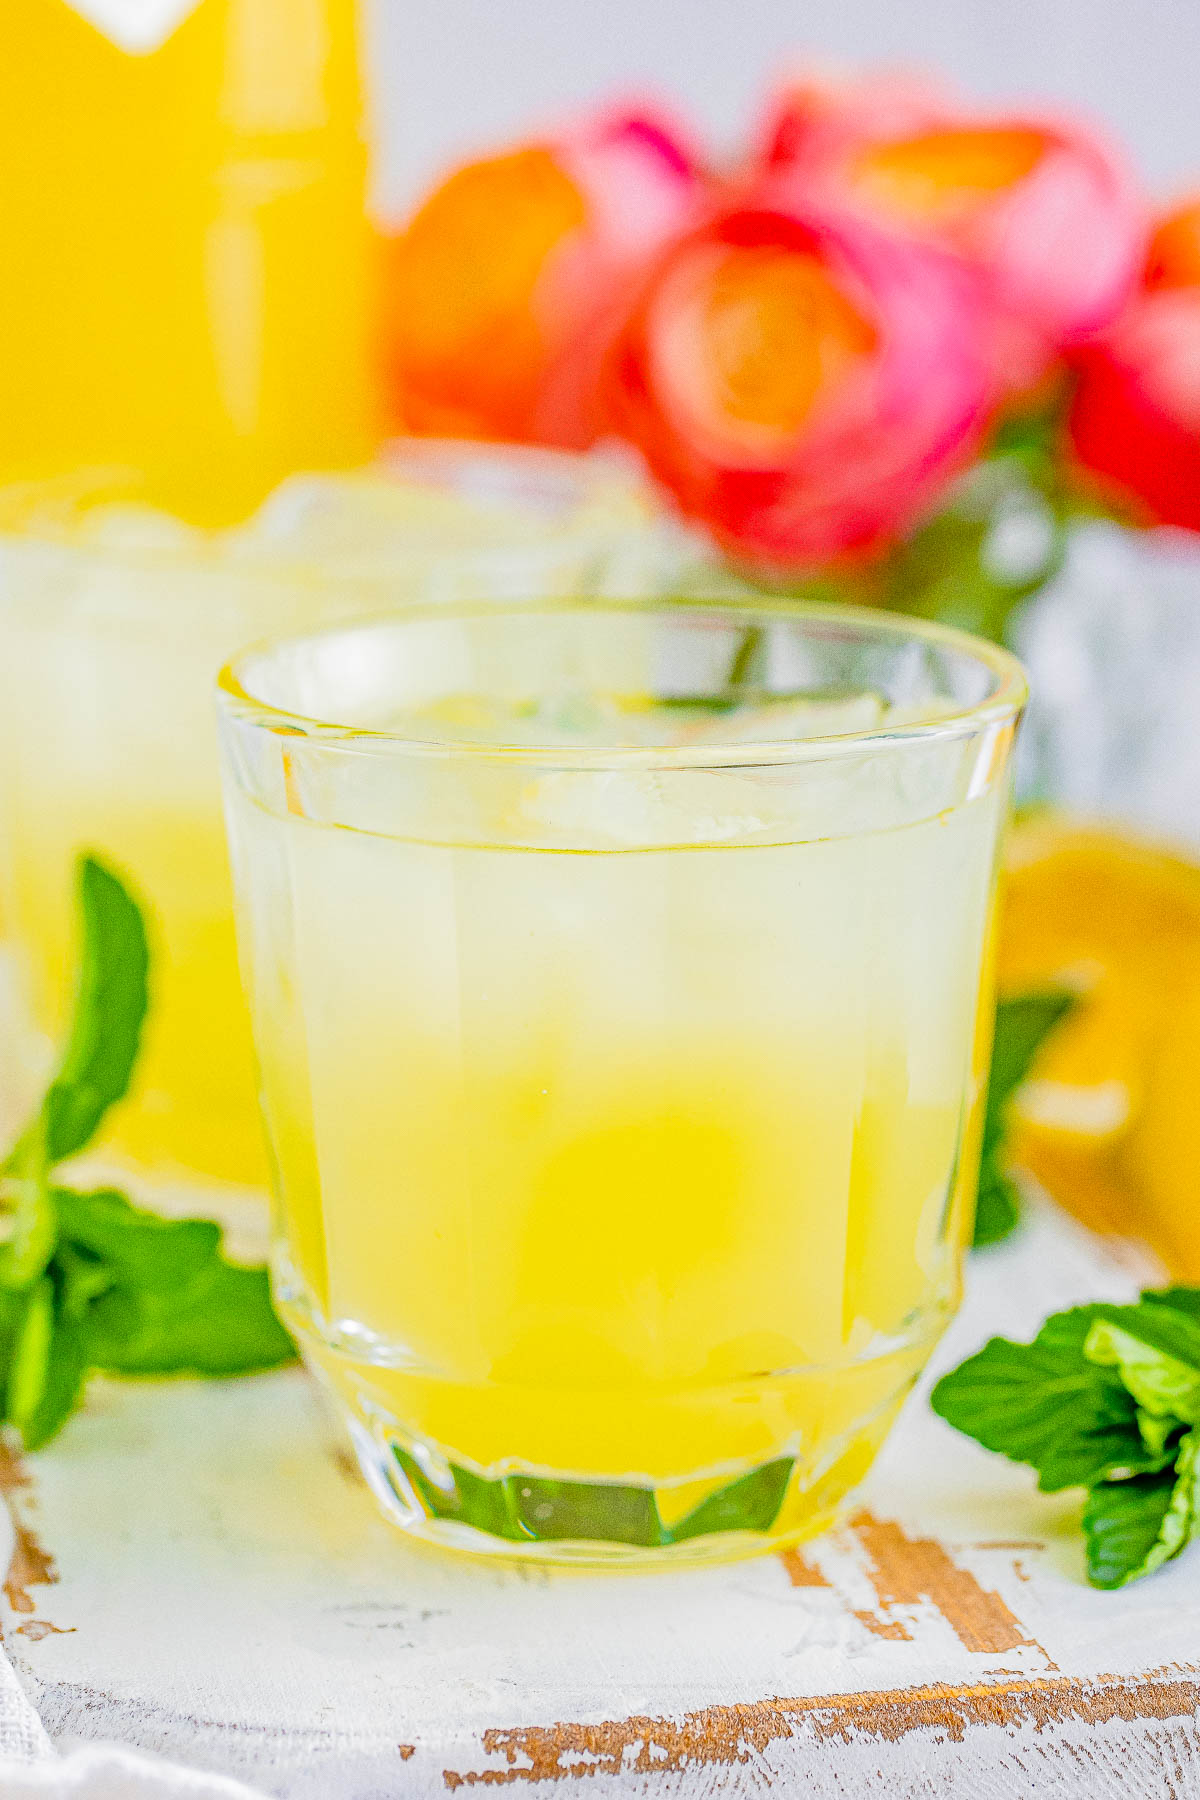 A glass of limoncello with ice cubes, garnished with mint leaves, accompanied by fresh lemons and flowers in the background.